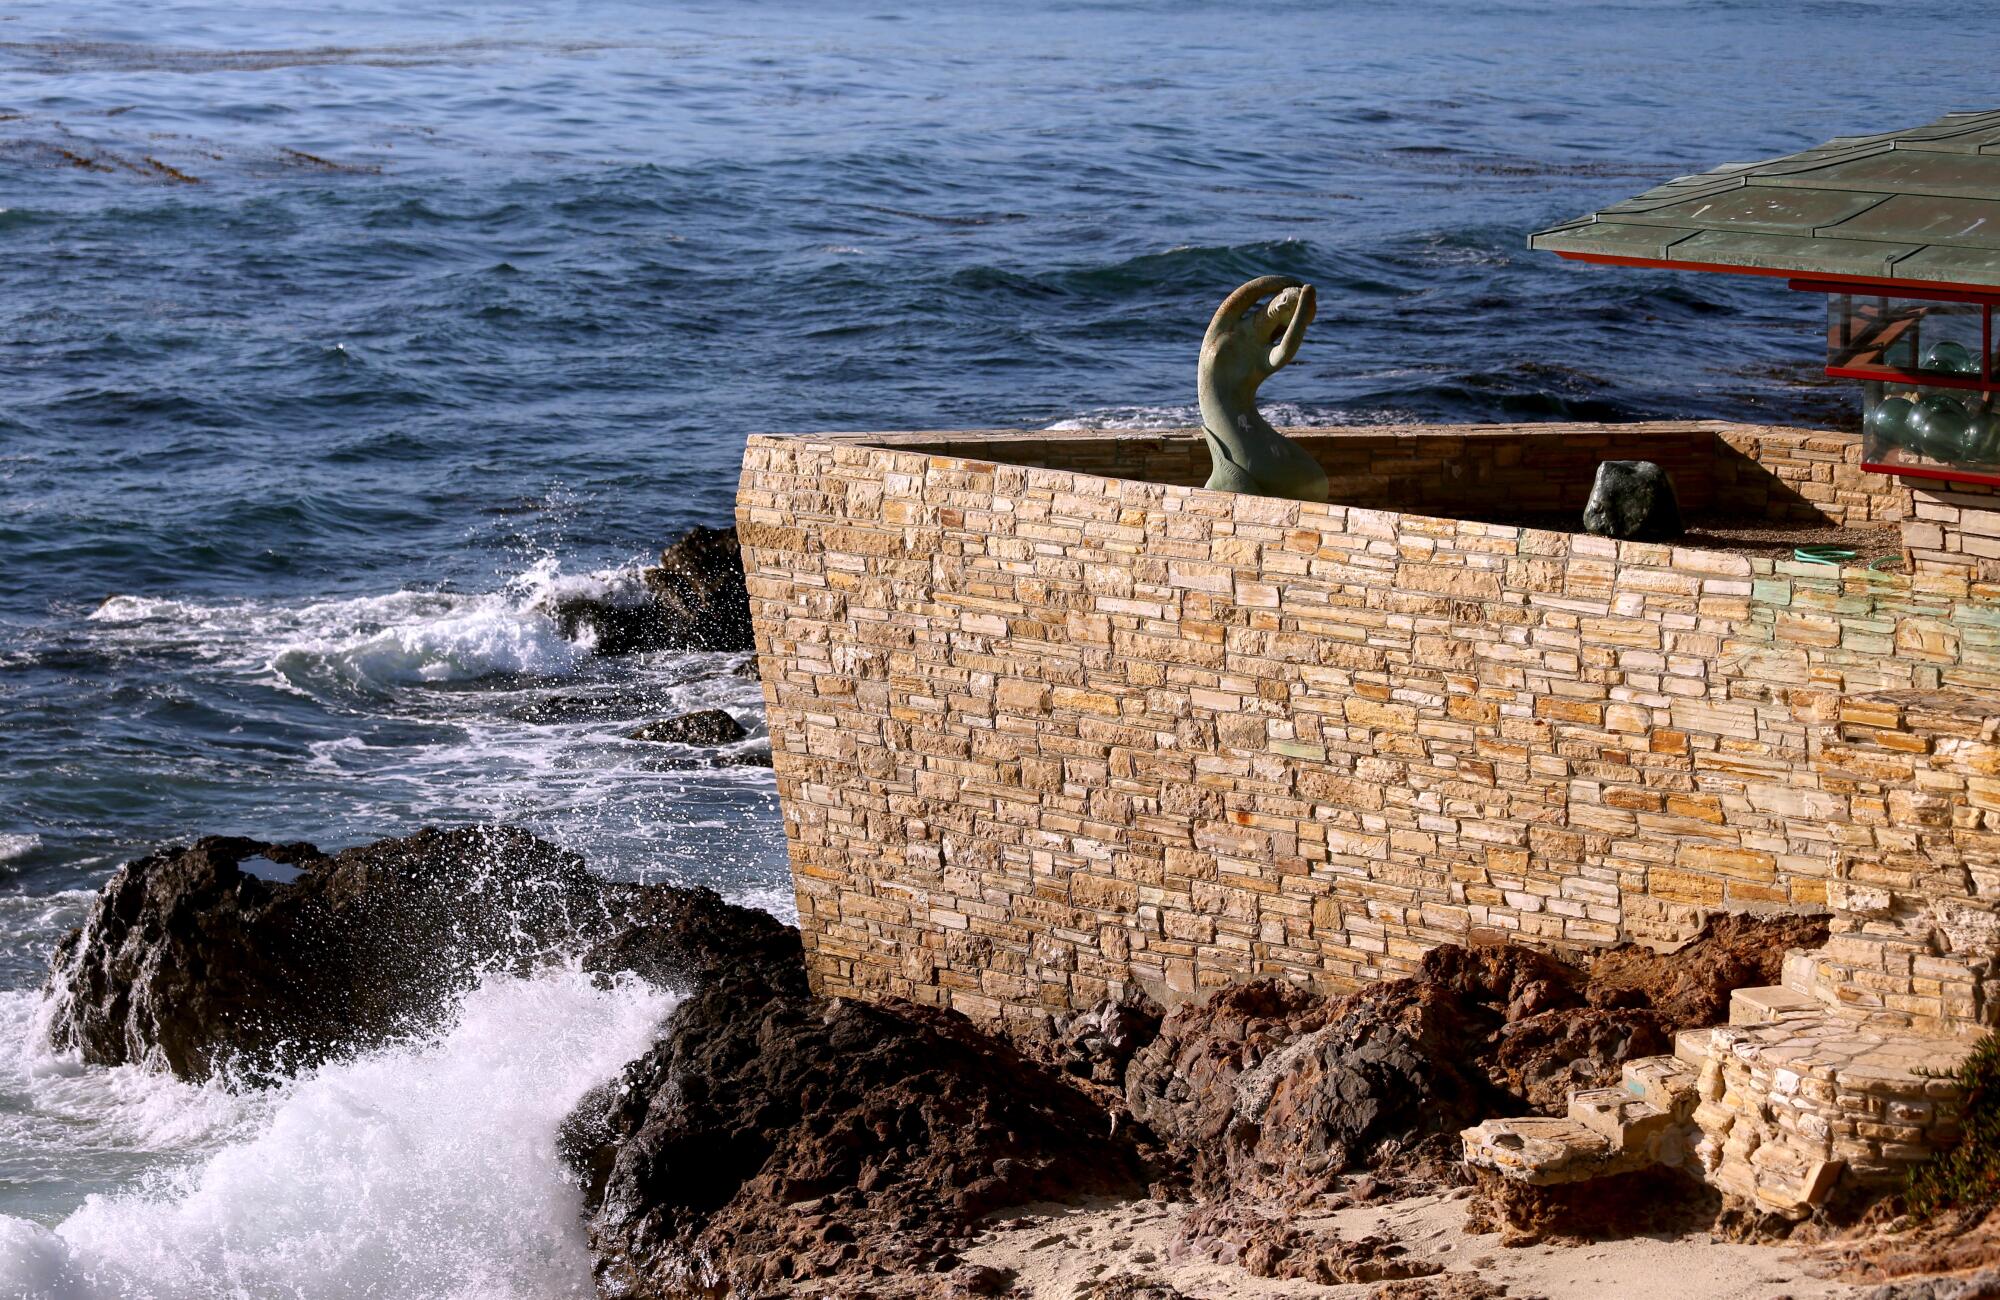 The stone walls of an historic home jut into the ocean like the prow of a ship. 